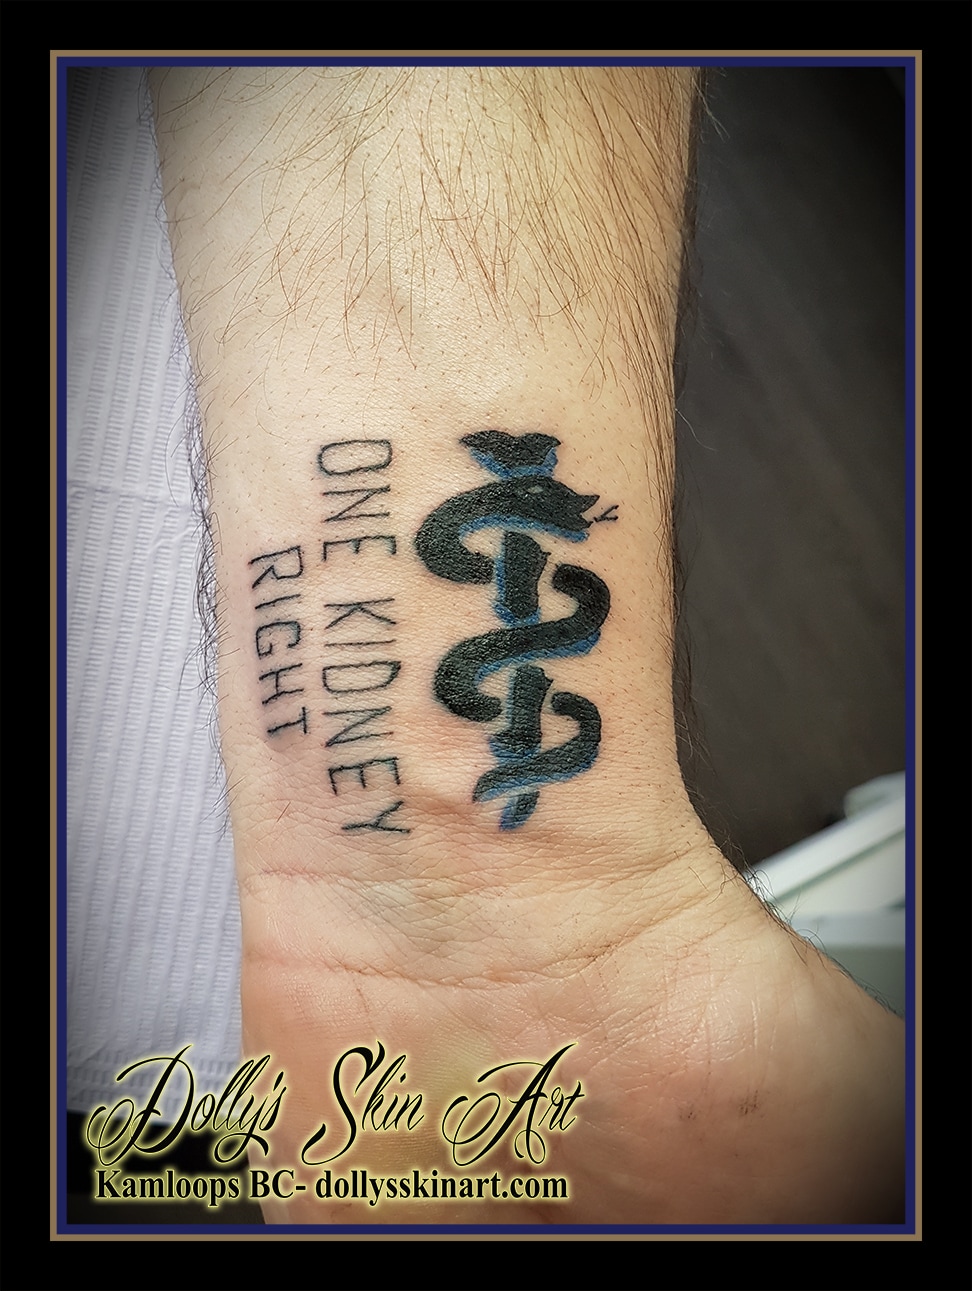 medical alert staff of Asclepius black blue one kidney right lettering font wrist kamloops tattoo dolly's skin art